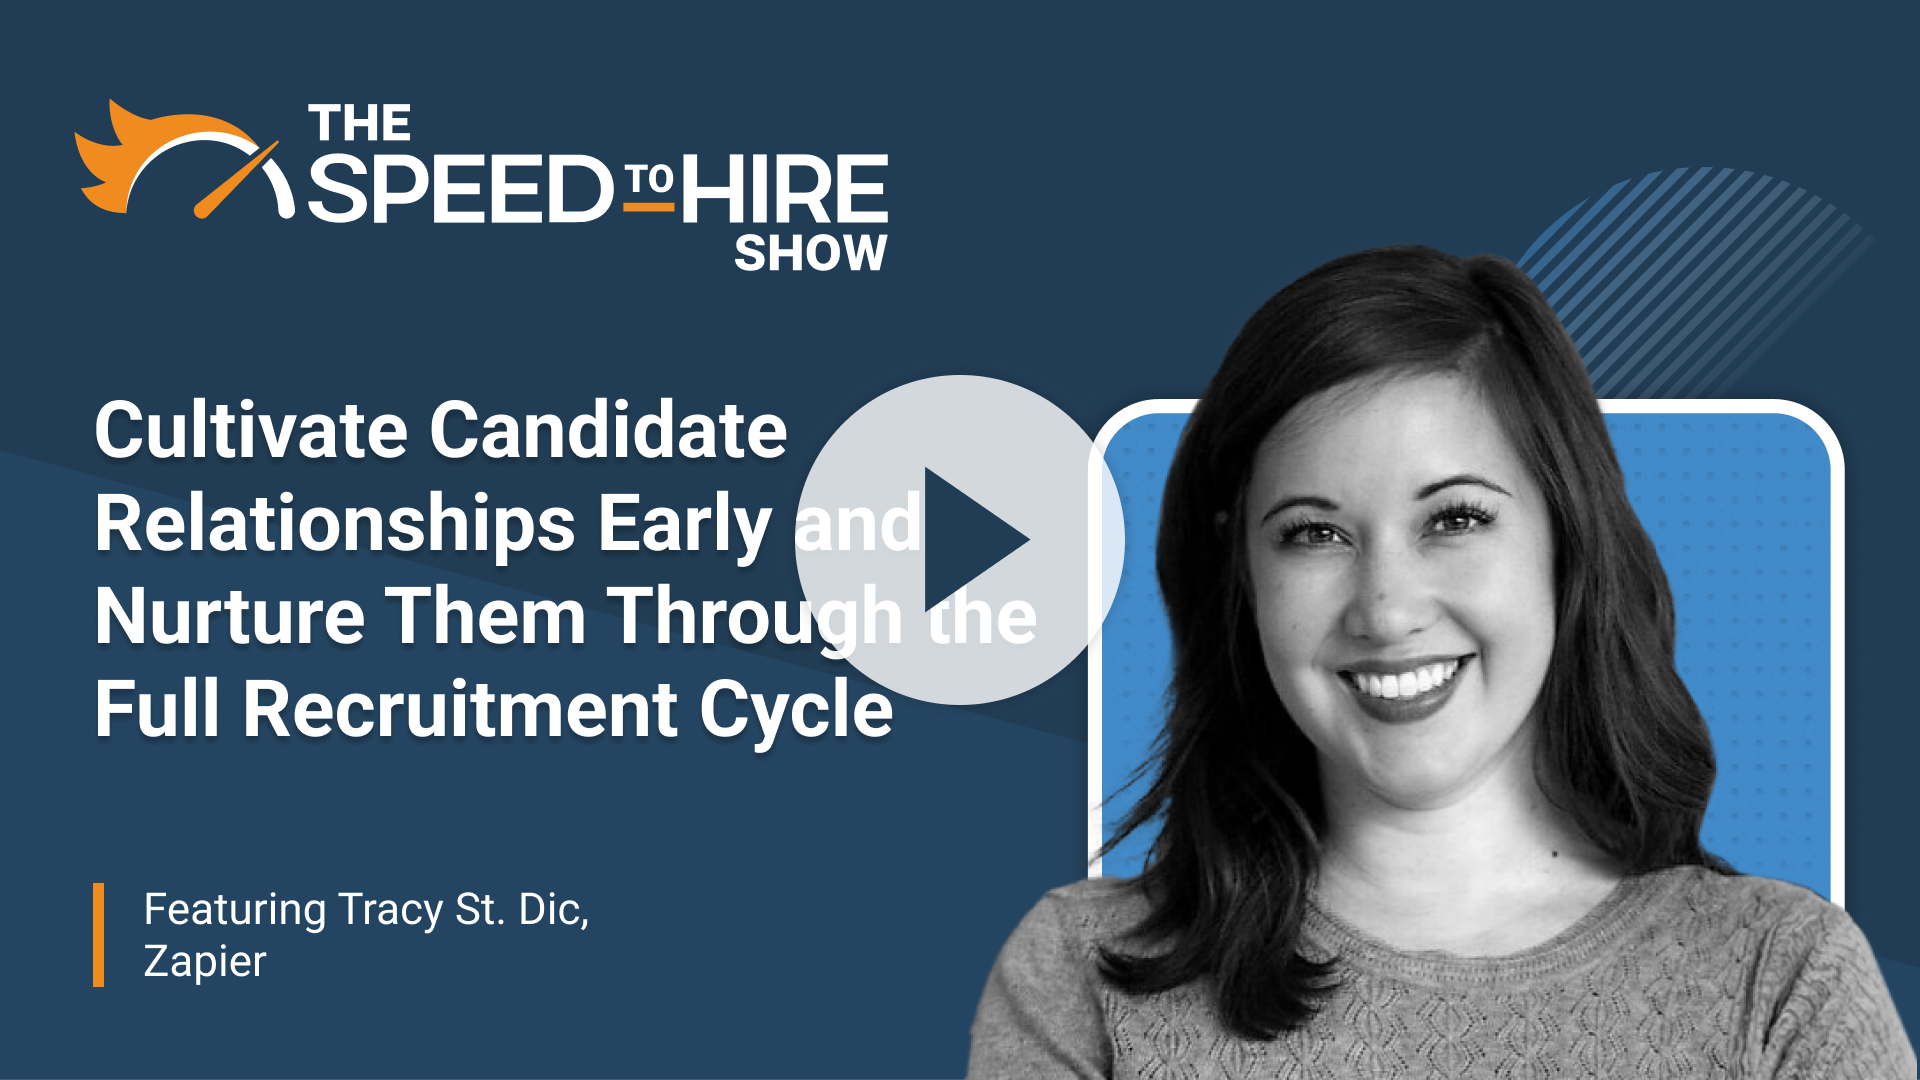 The Speed to Hire Show - Cultivate Candidate Relationships - Employer Branding Tips